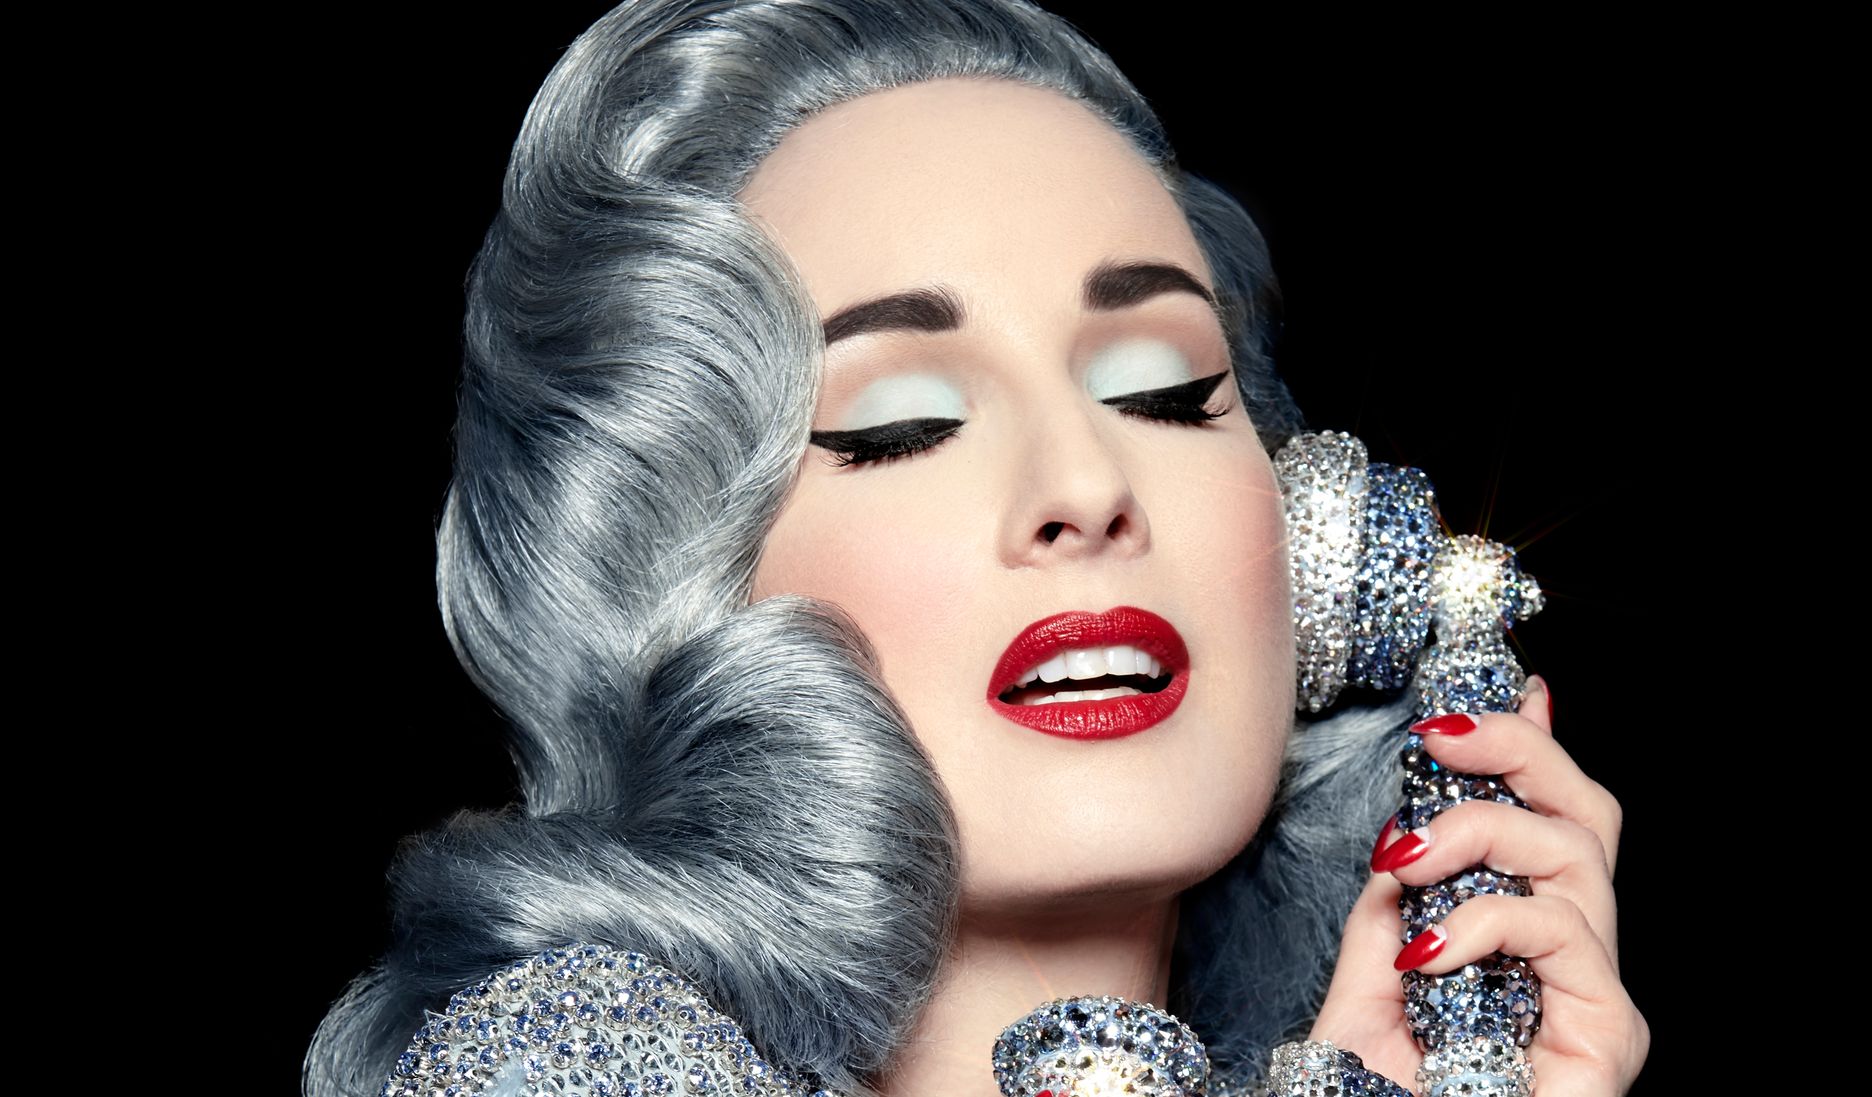 ‘The LGBTI community want to see their idols age and be inspiring’: Dita Von Teese